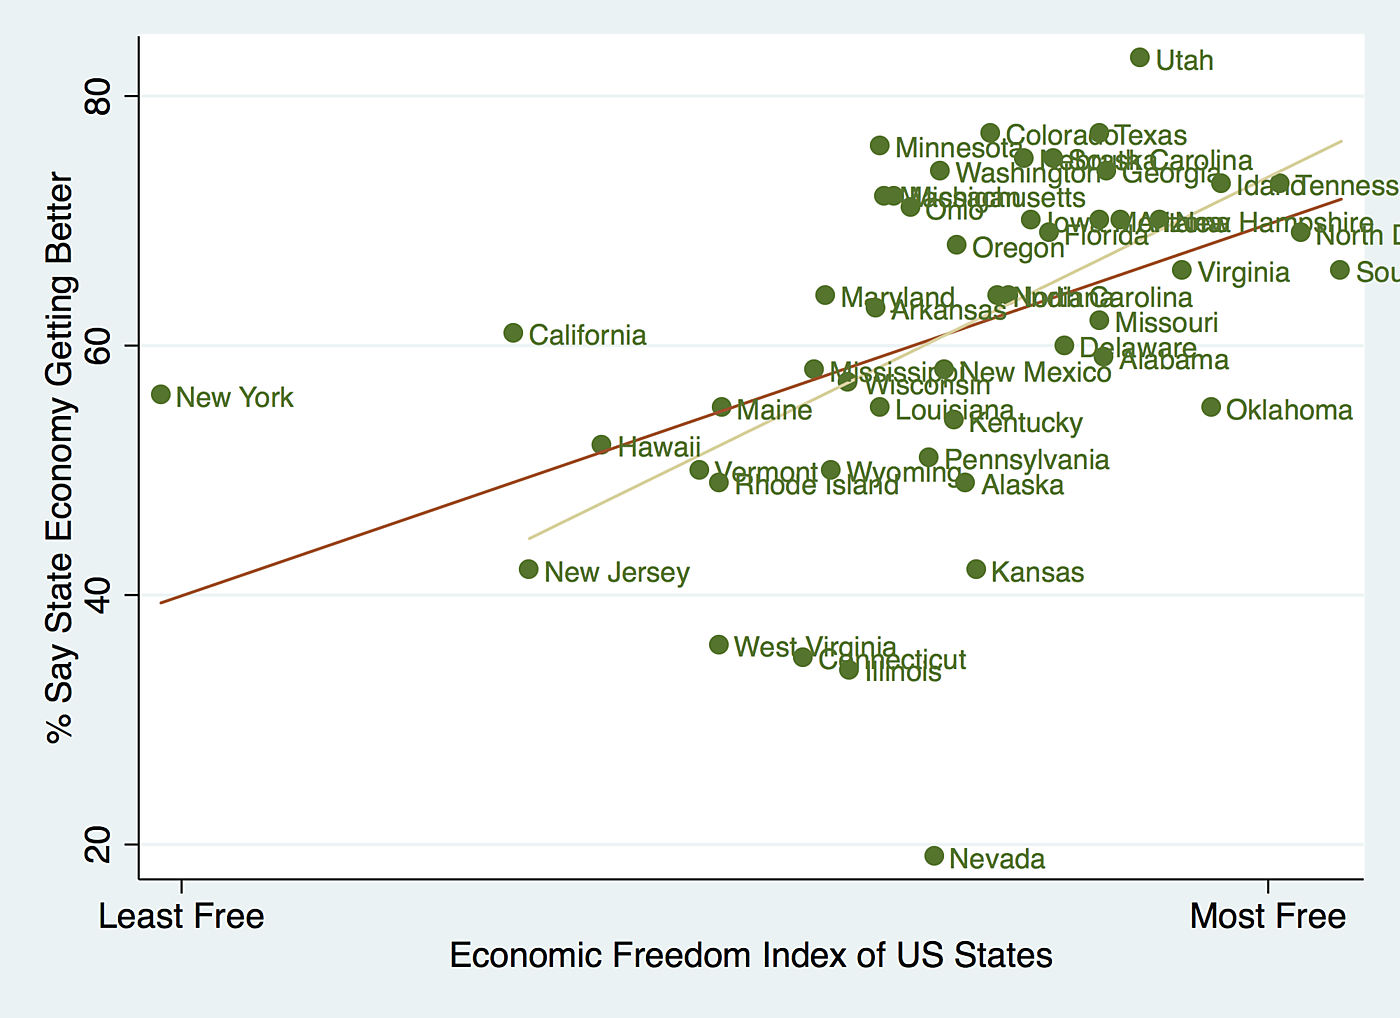 Source: Economic Freedom Index 2011, Freedom in the 50 States; Gallup 50-State Poll 2015. Correlation: .44, if outliers like New York, California, and Nevada are excluded, correlation rises to .58.